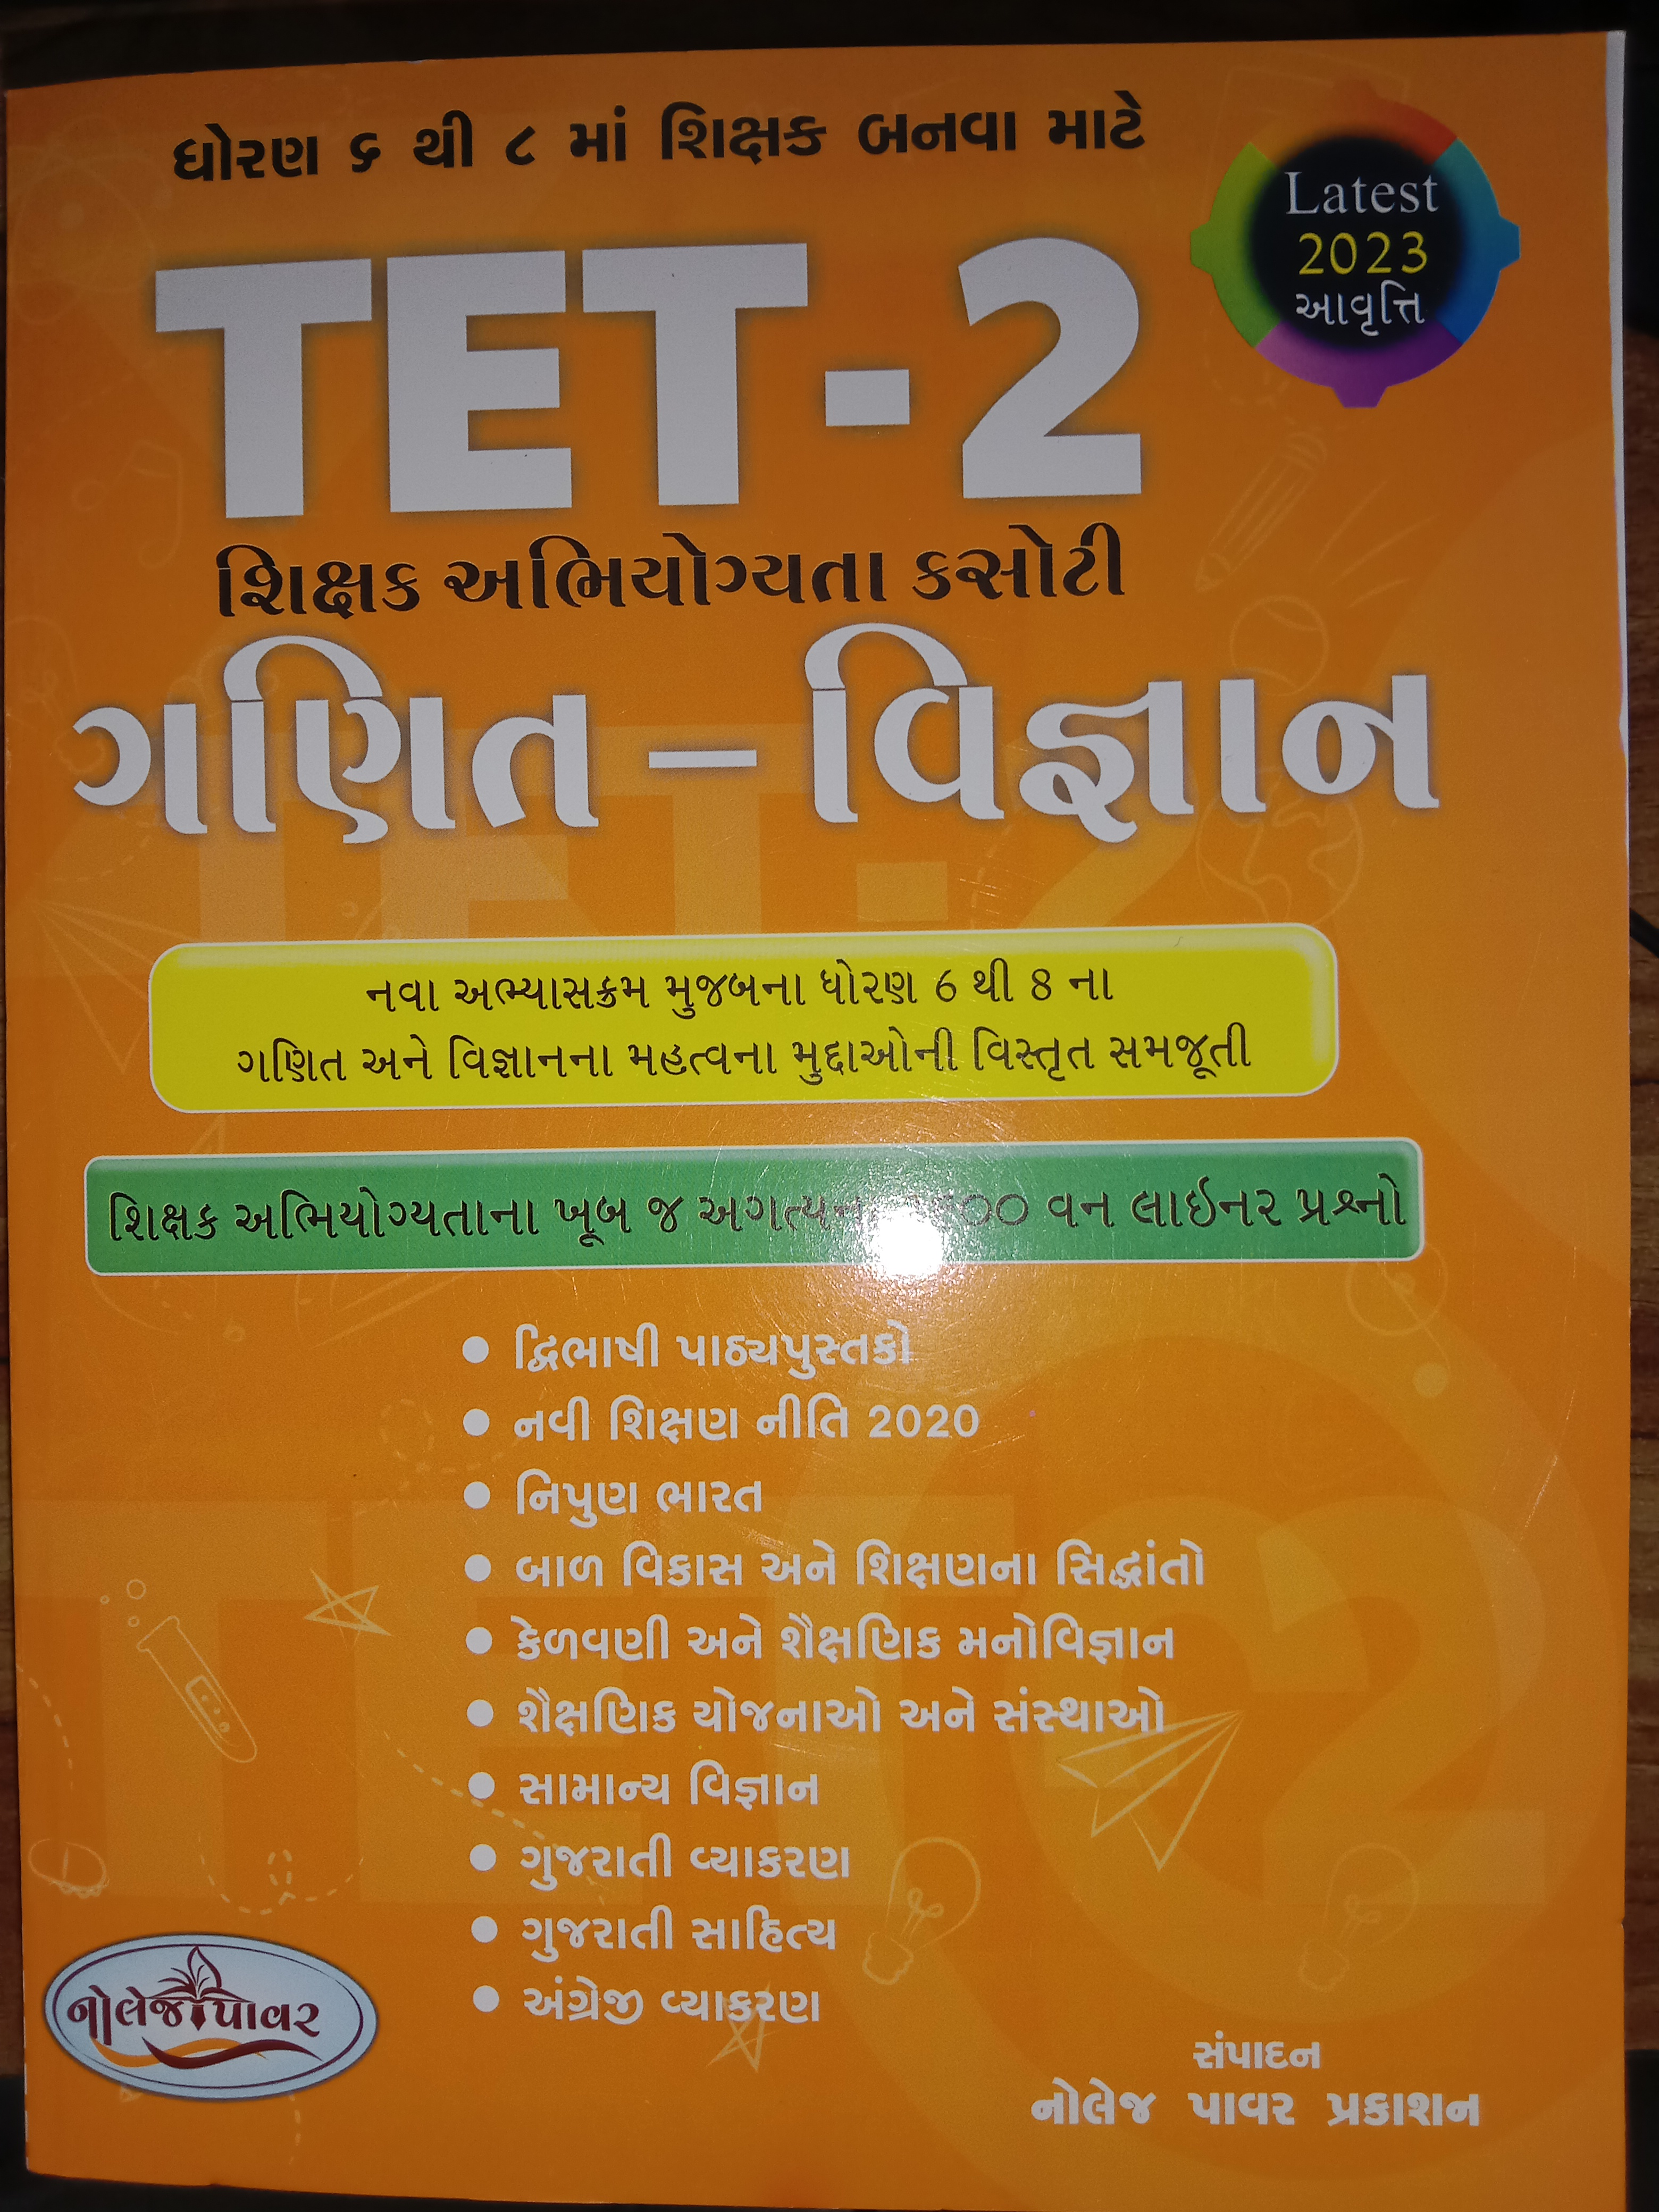 Tet-2  Maths-science, Late- 2023